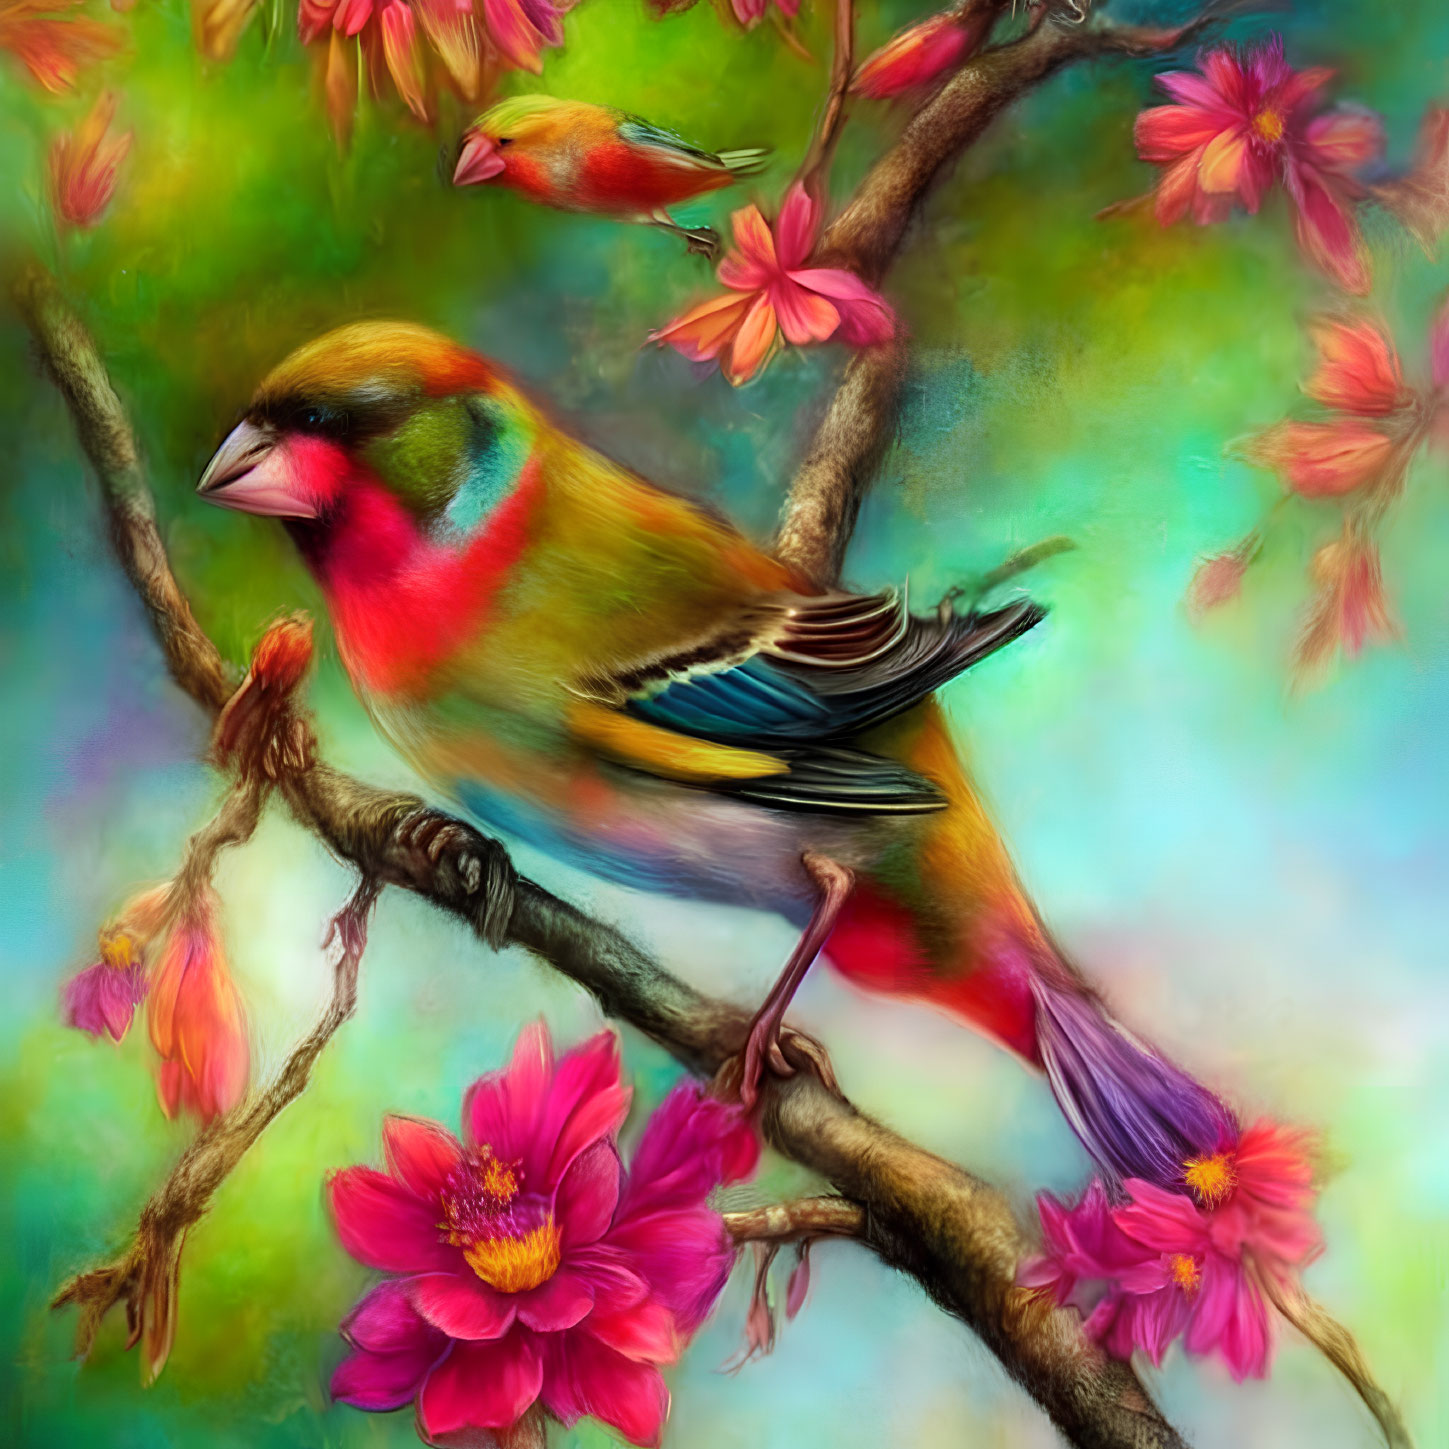 Vibrant bird with colorful plumage perched on branch among blooming flowers